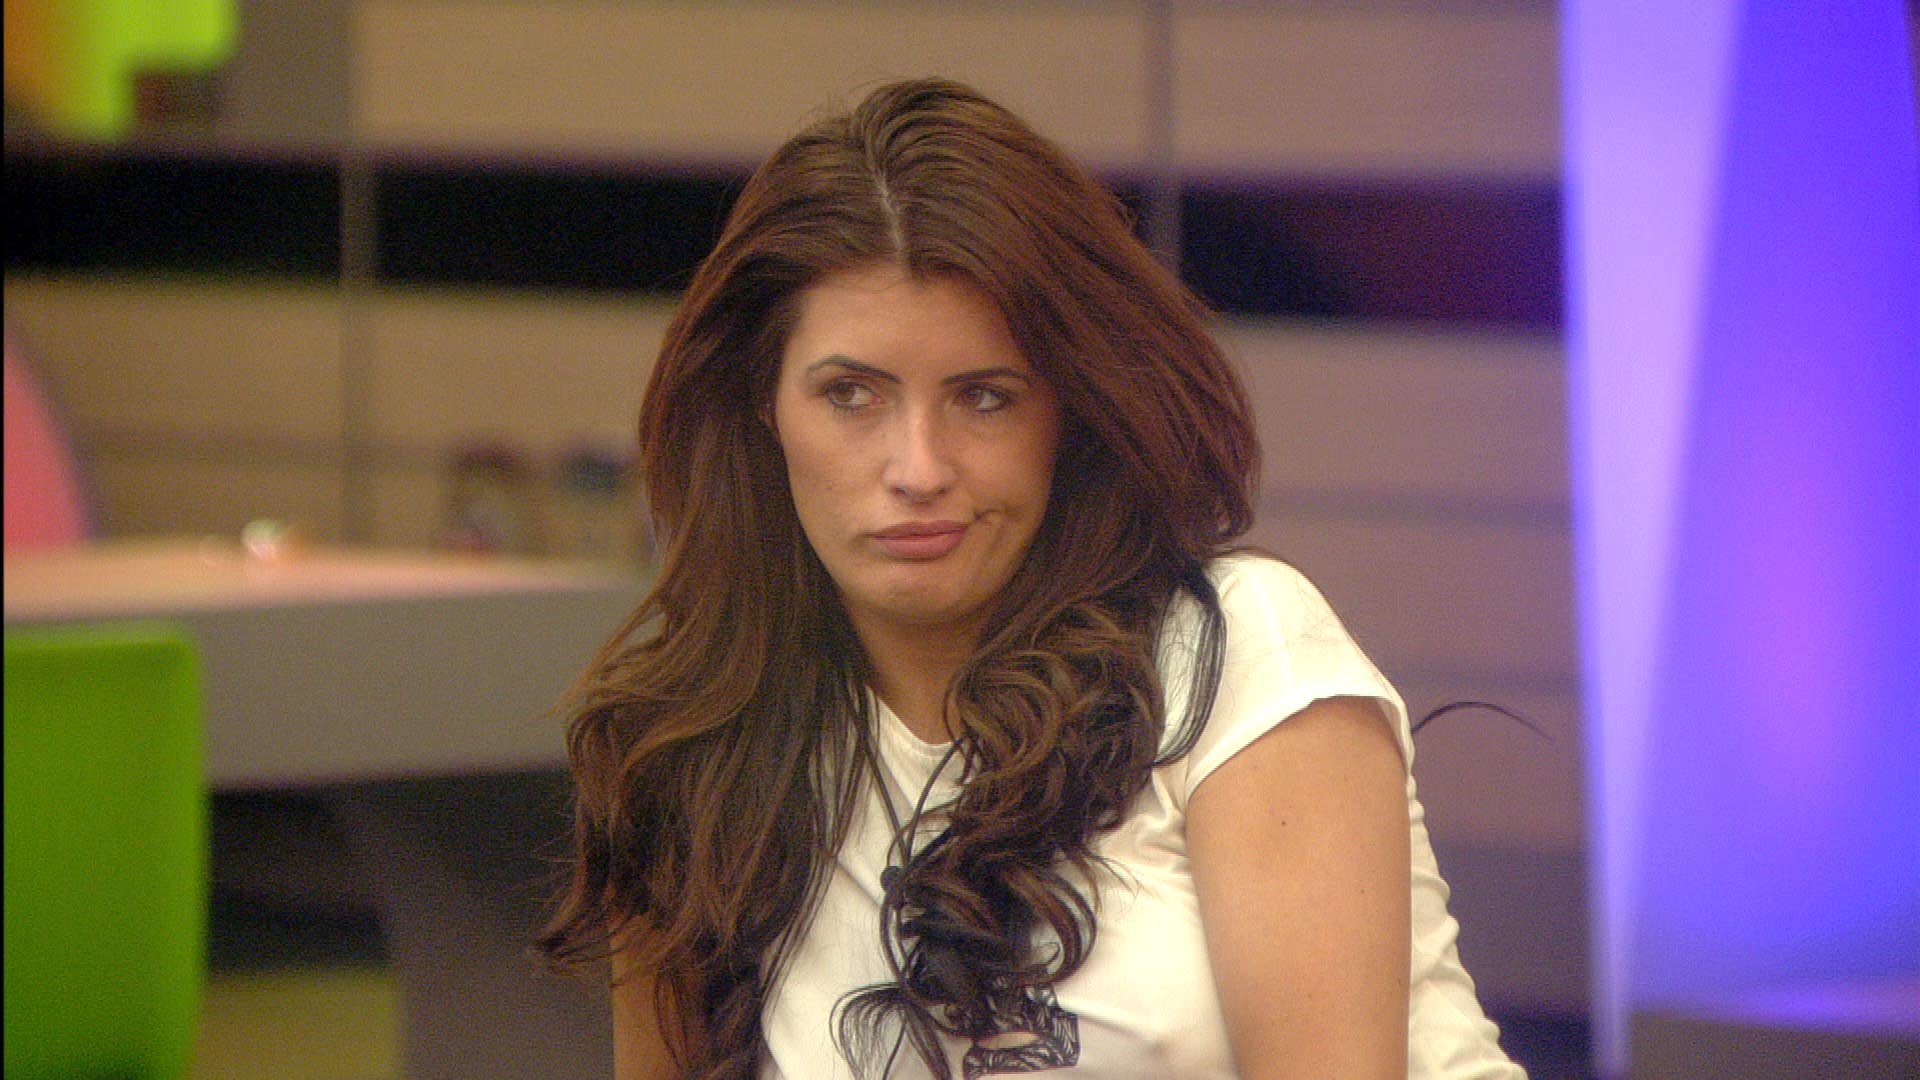 Day 64: Helen warned by Big Brother over Ashleigh threat